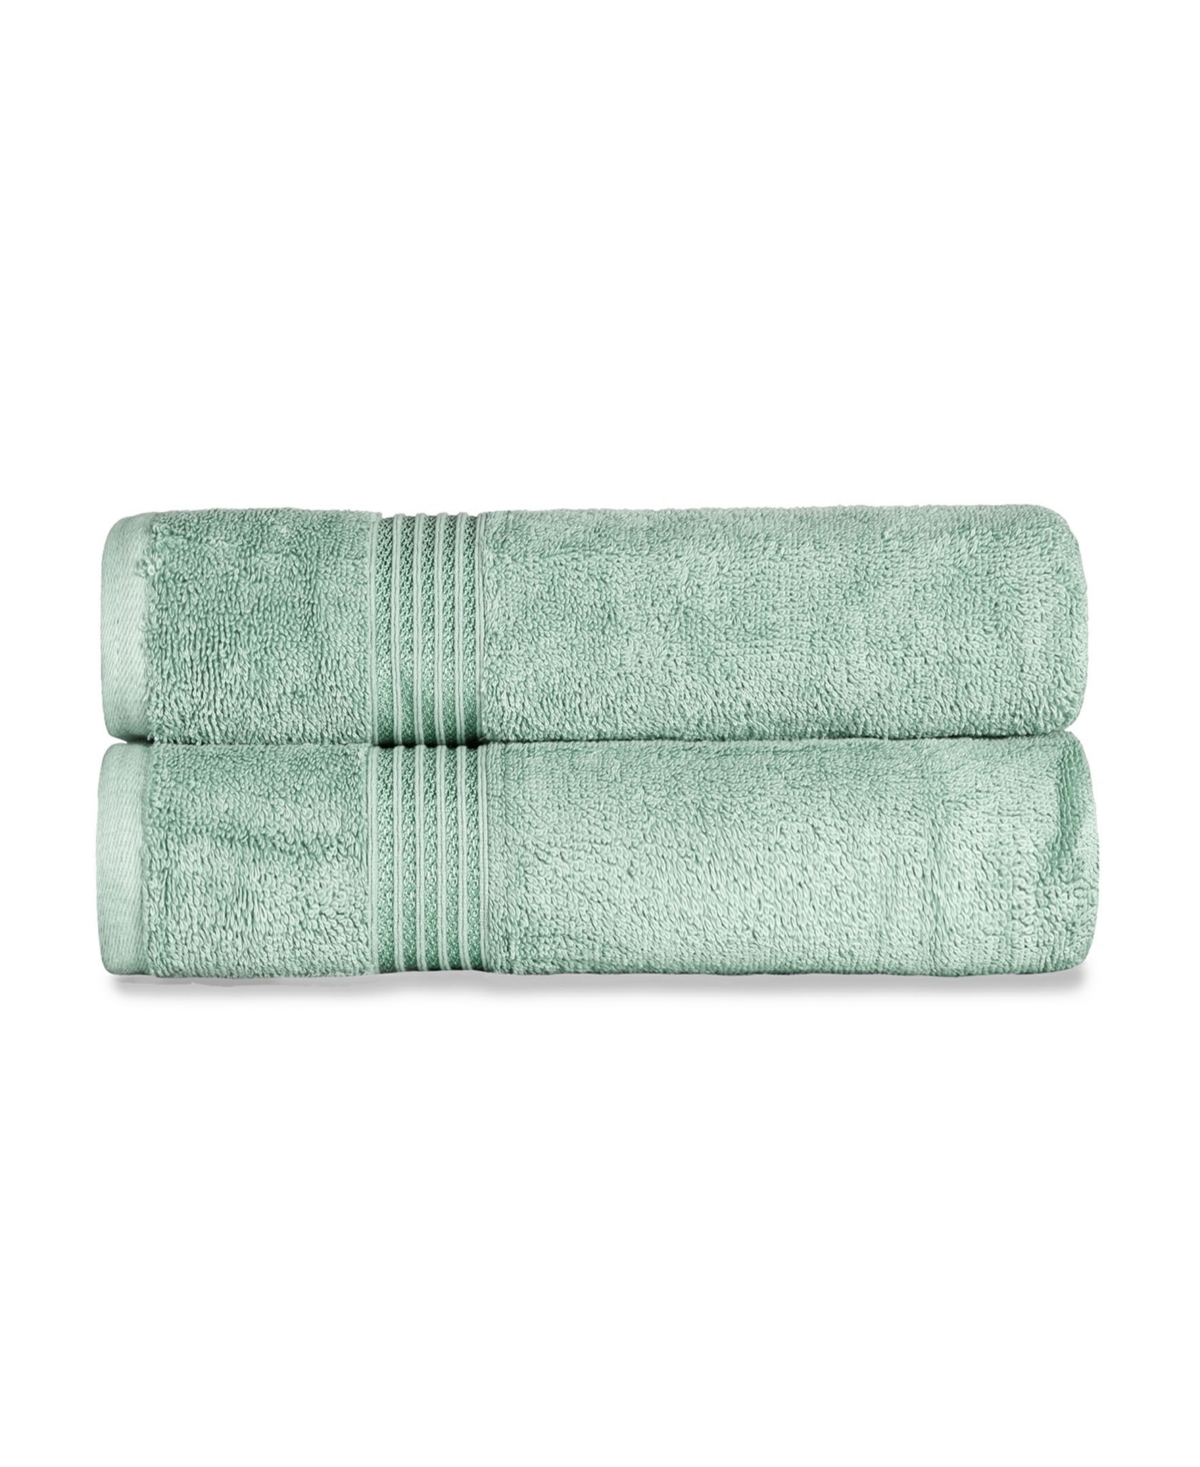 Superior Solid Quick Drying Absorbent 2 Piece Egyptian Cotton Bath Sheet Towel Set Bedding In Sage